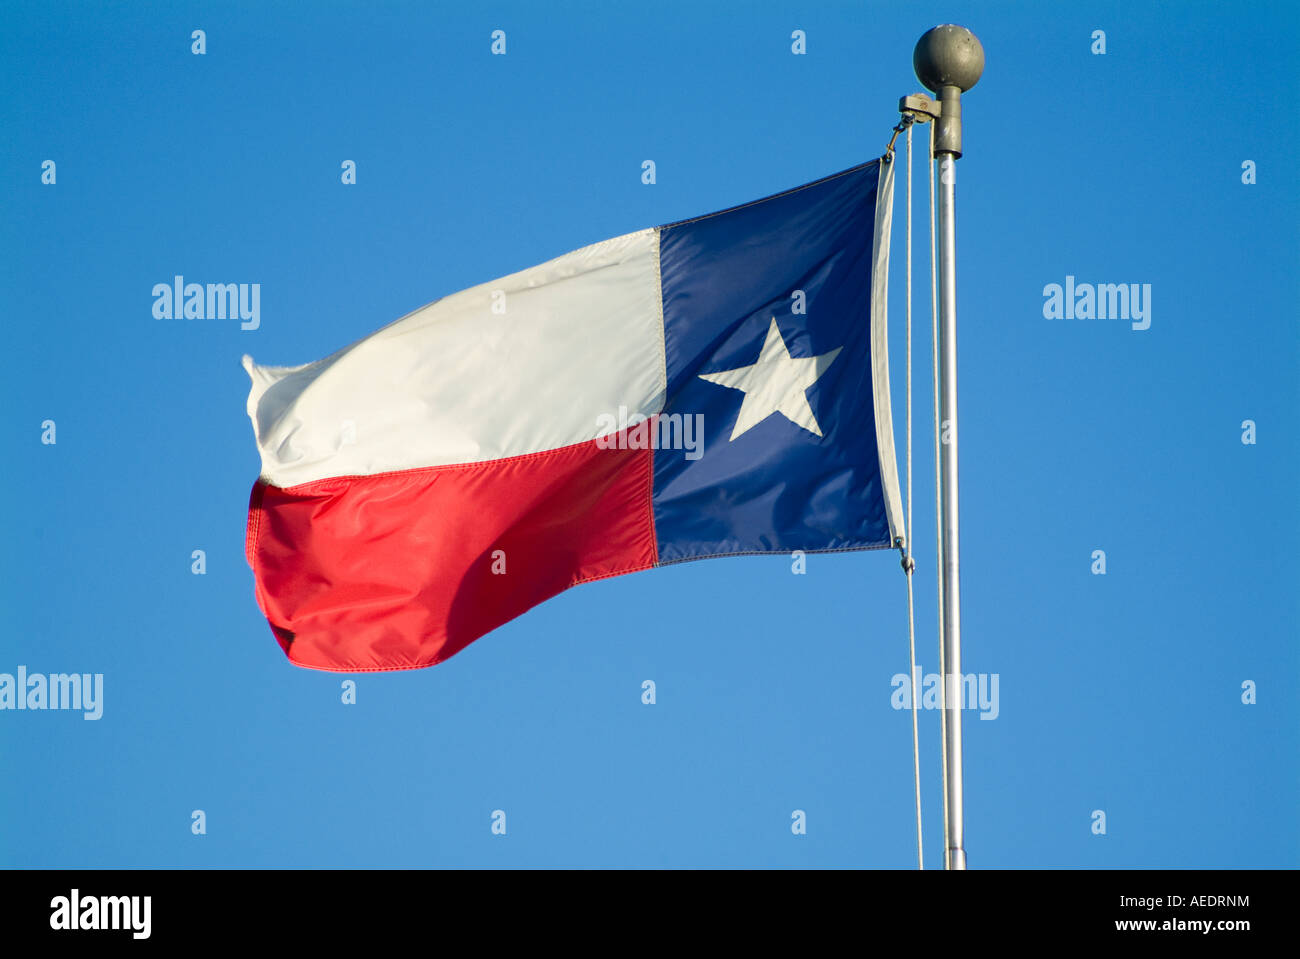 Colorful flying Texas state flag Stock Photo